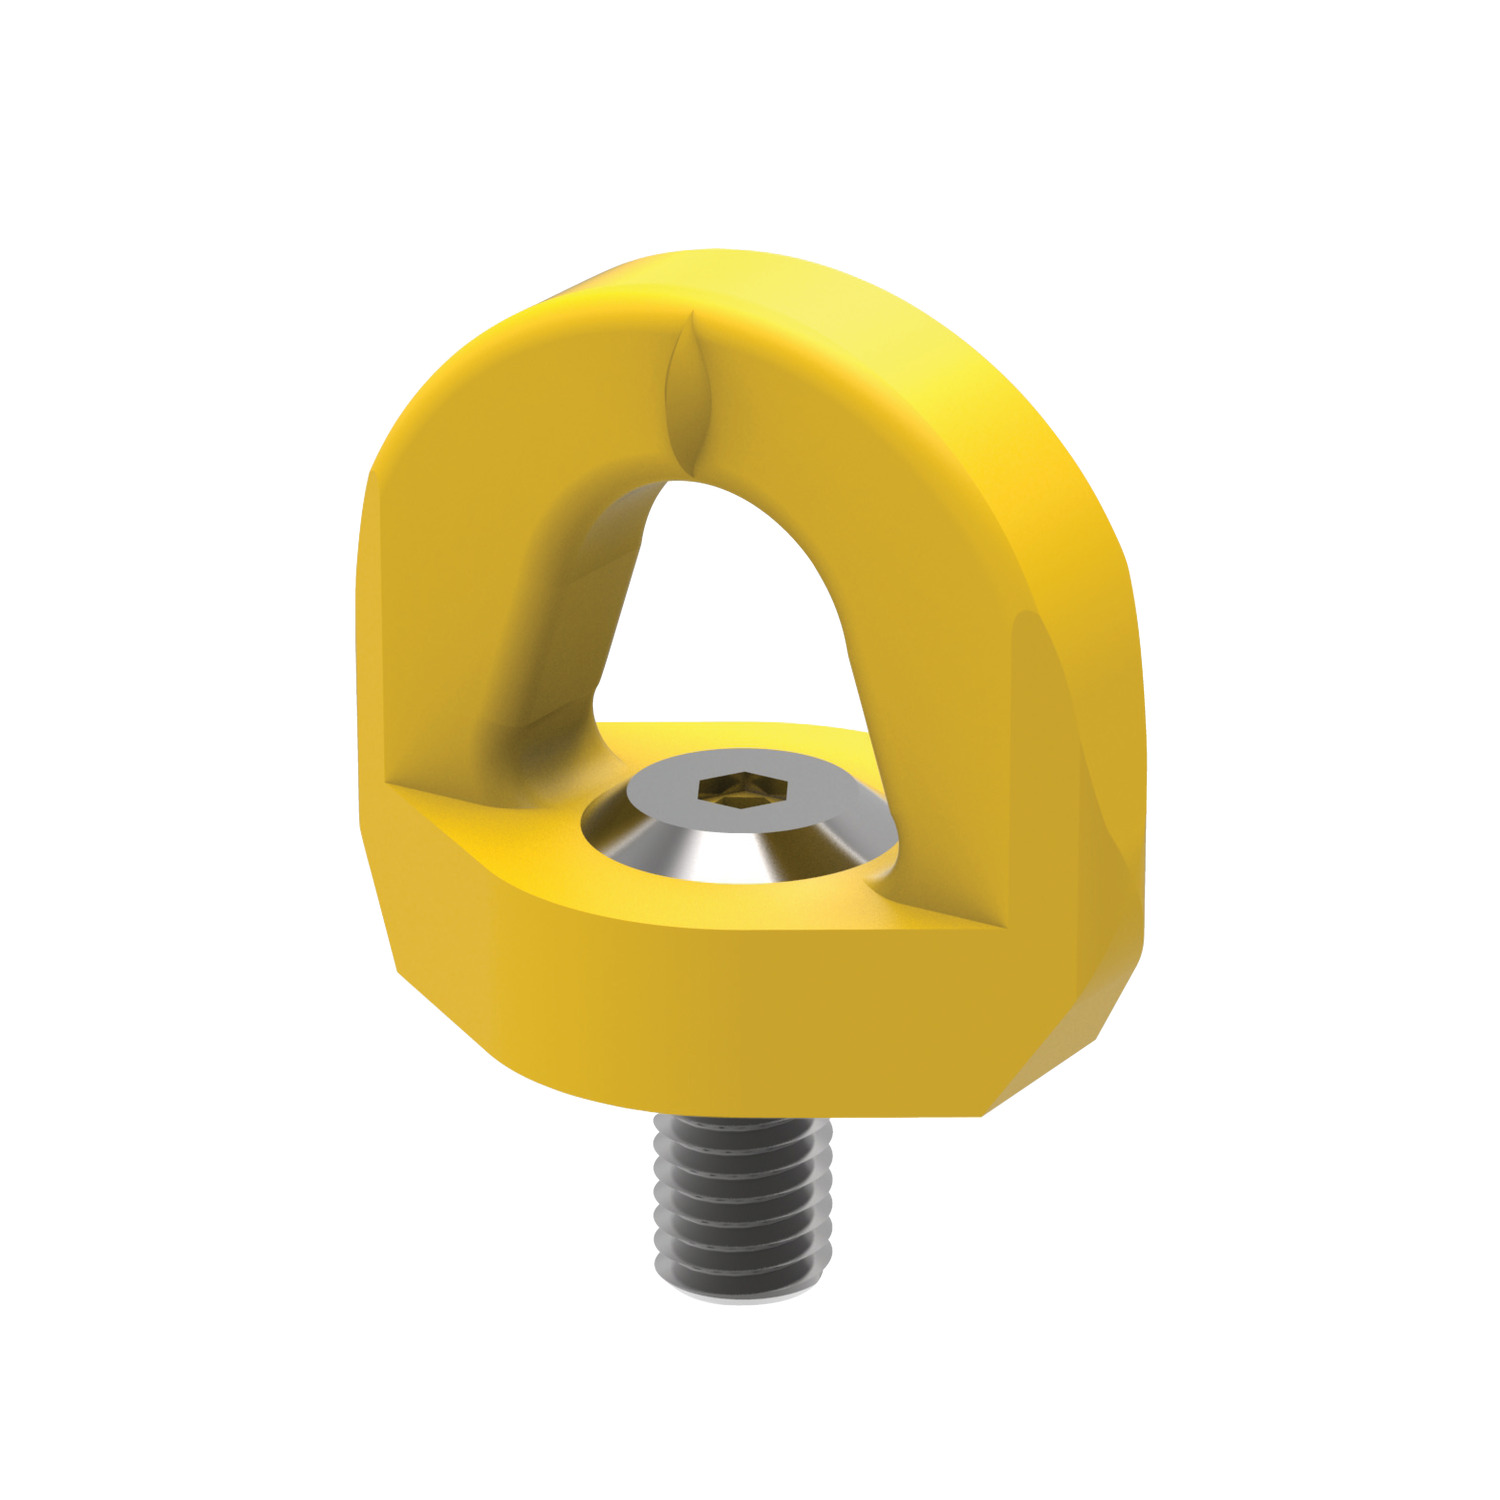 Fall Arrest Swivel Rings High visibility lifting bolts for use by personnel in safety harnesses. Marked with the number of people each ring can support. Ideal for maintenance of buildings or offshore industries.